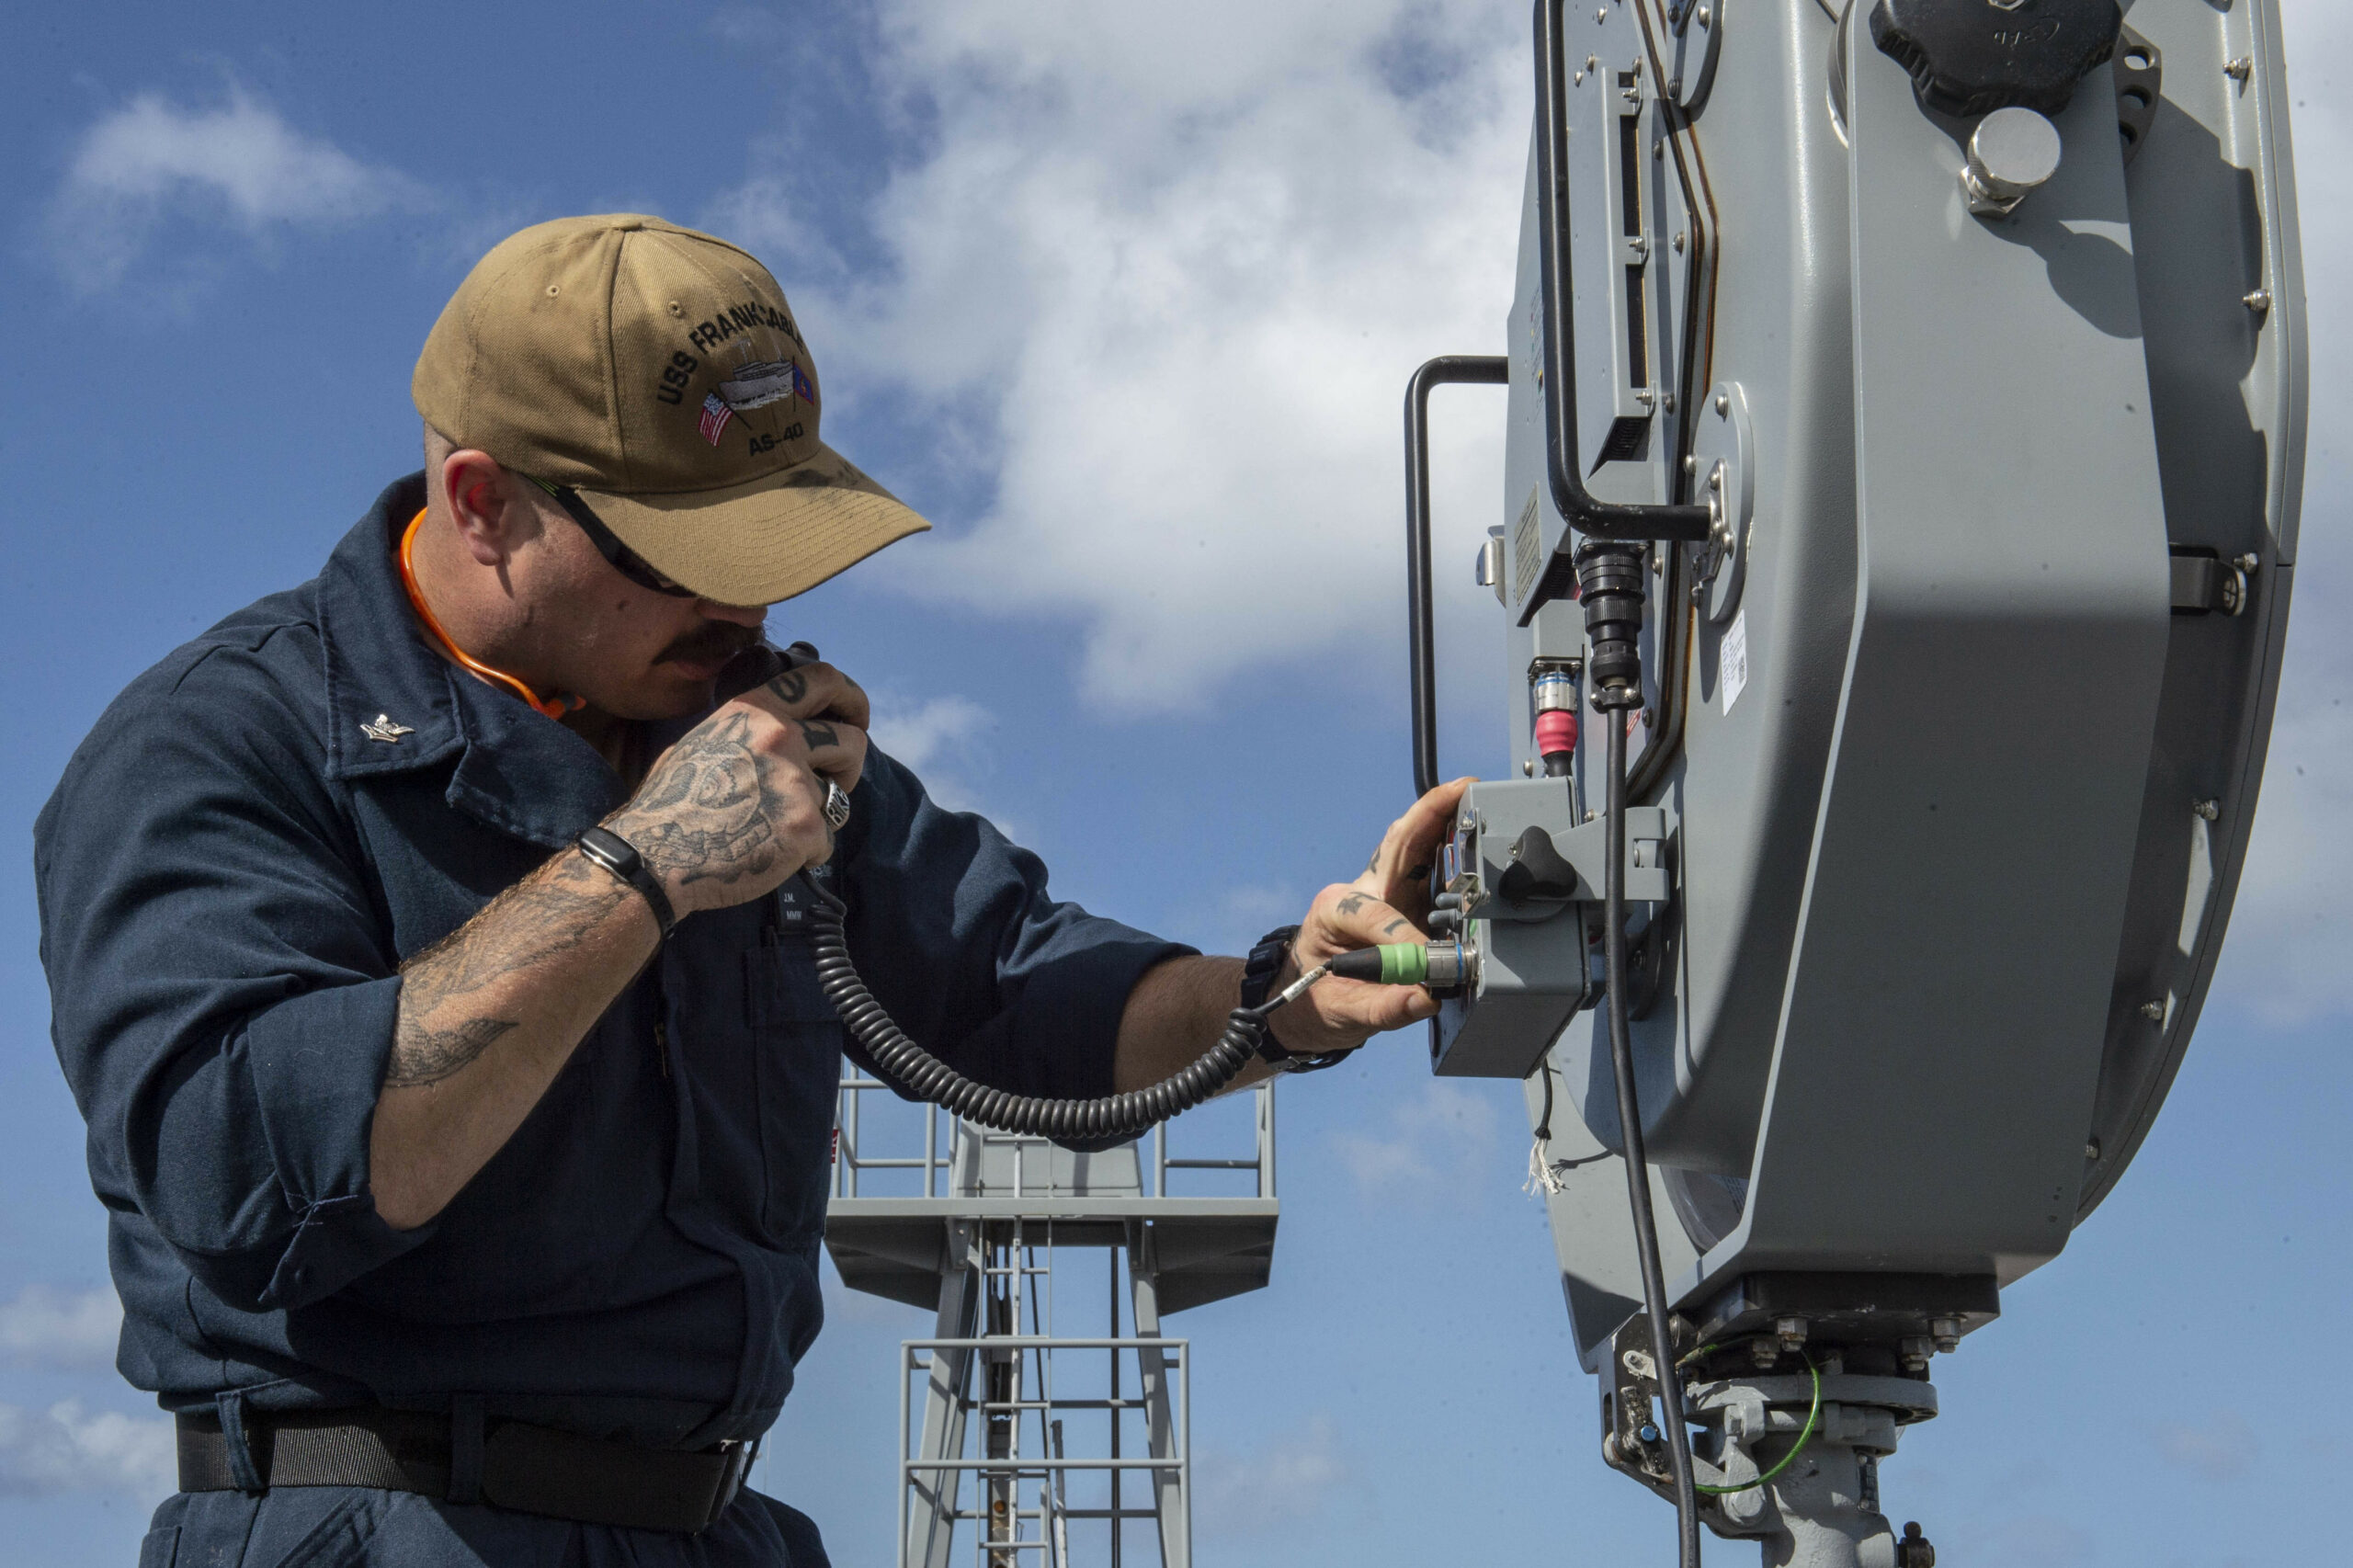 APRA HARBOR, Guam (Dec. 16, 2019) - Torpedoman’s Mate 2nd Class Joseph Sowders tests a long range acoustic device aboard the submarine tender USS Frank Cable (AS 40) as the ship departs to conduct sea trials. Frank Cable, forward deployed to the island of Guam, repairs, rearms, and re-provisions submarines and surface vessels in the Indo-Pacific region. (U.S. Navy photo by Mass Communication Specialist 1st Class Derek Harkins/Released)